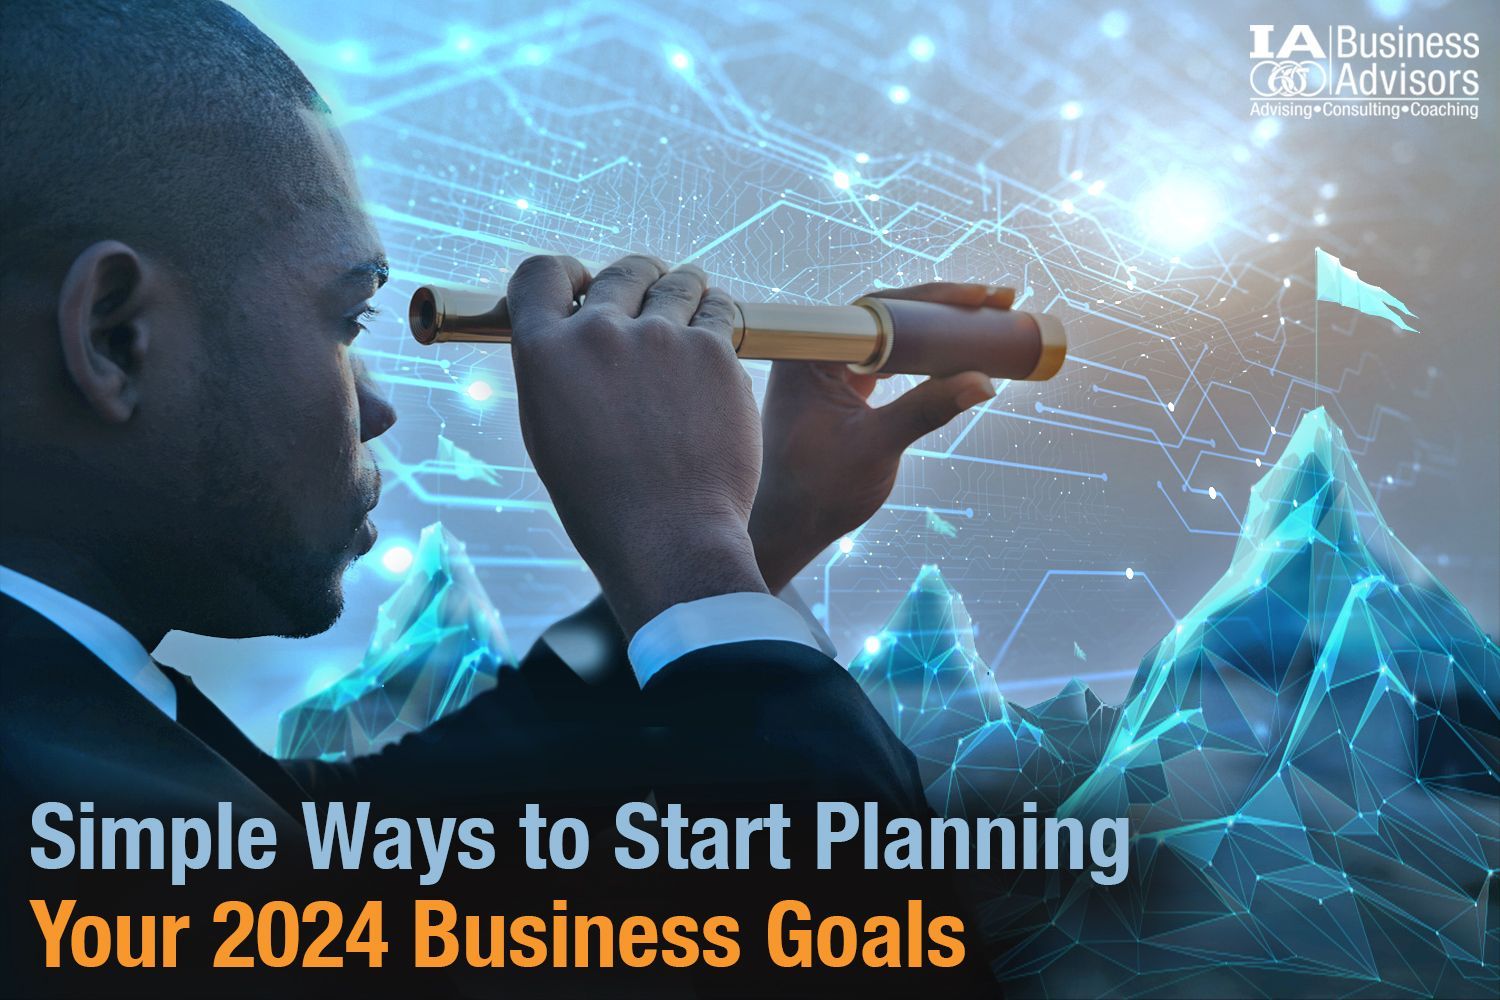 Simple Ways to Start Planning Your 2024 Business Goals